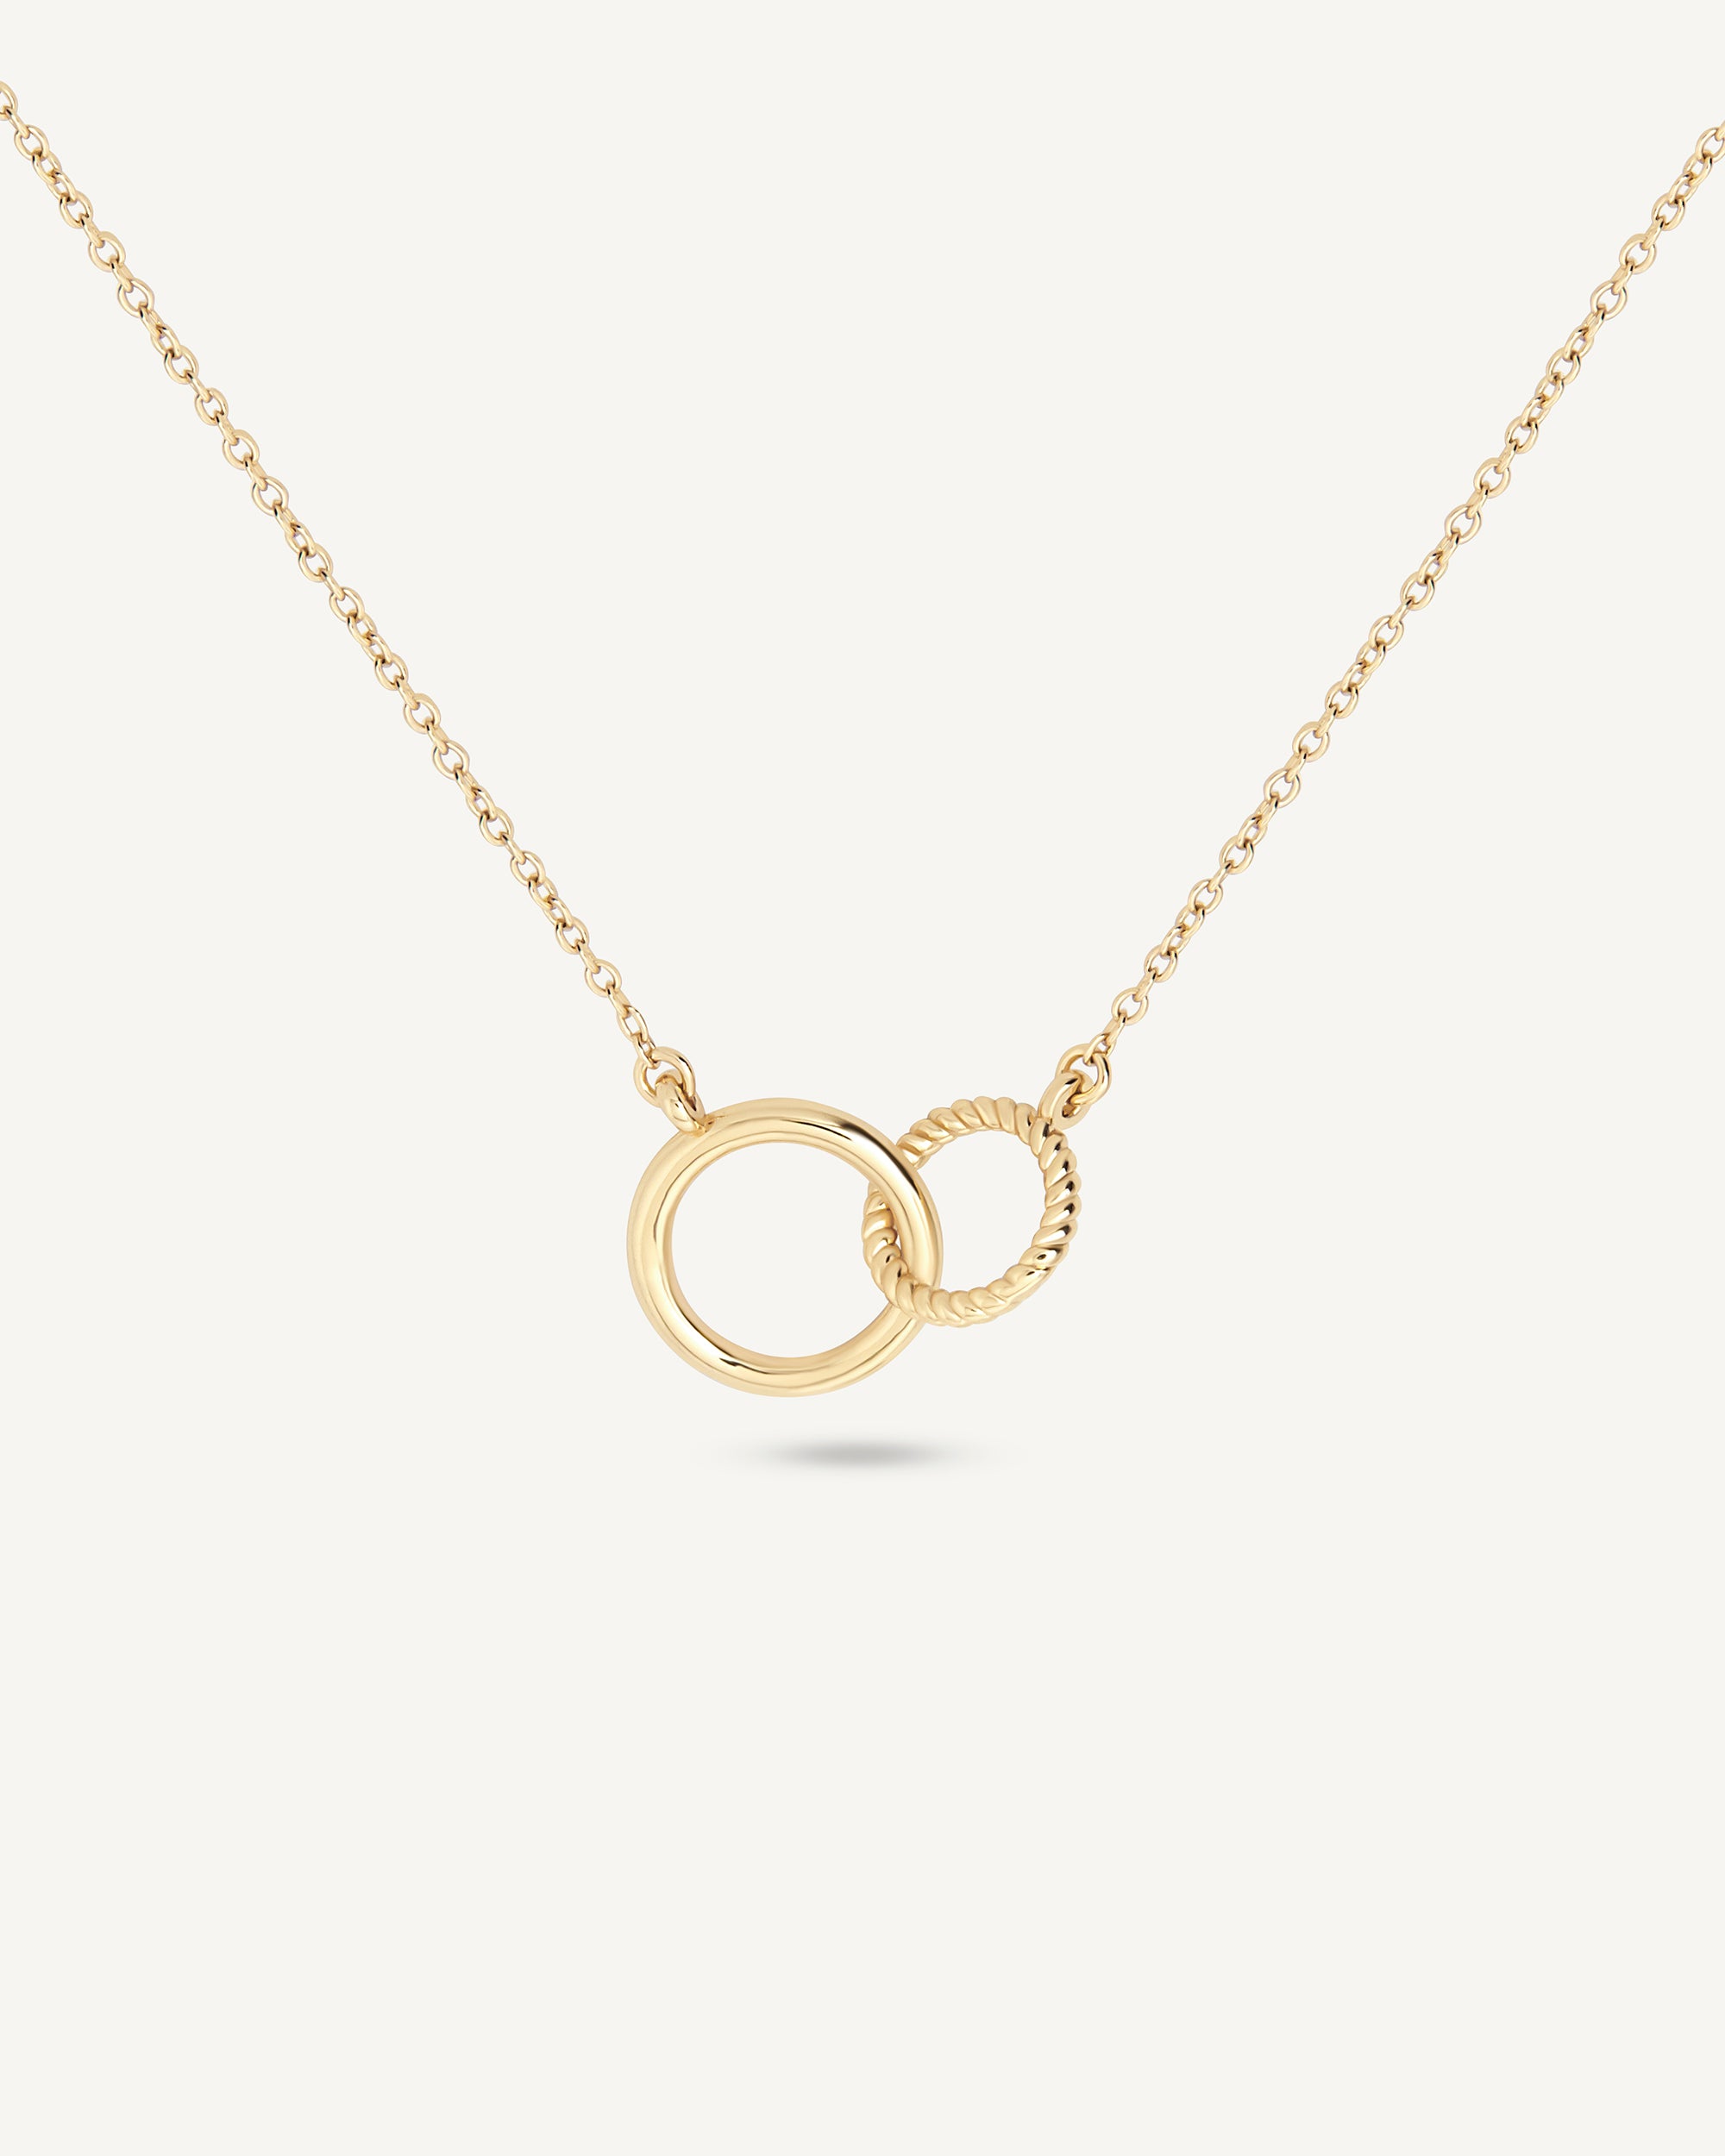 Buy 24k Gold Plated Handmade Interlocking Circles Necklace With Cubic  Zirconia Crystals/minimalist/dainty Jewellery/non-tarnish/gift Idea Online  in India - Etsy